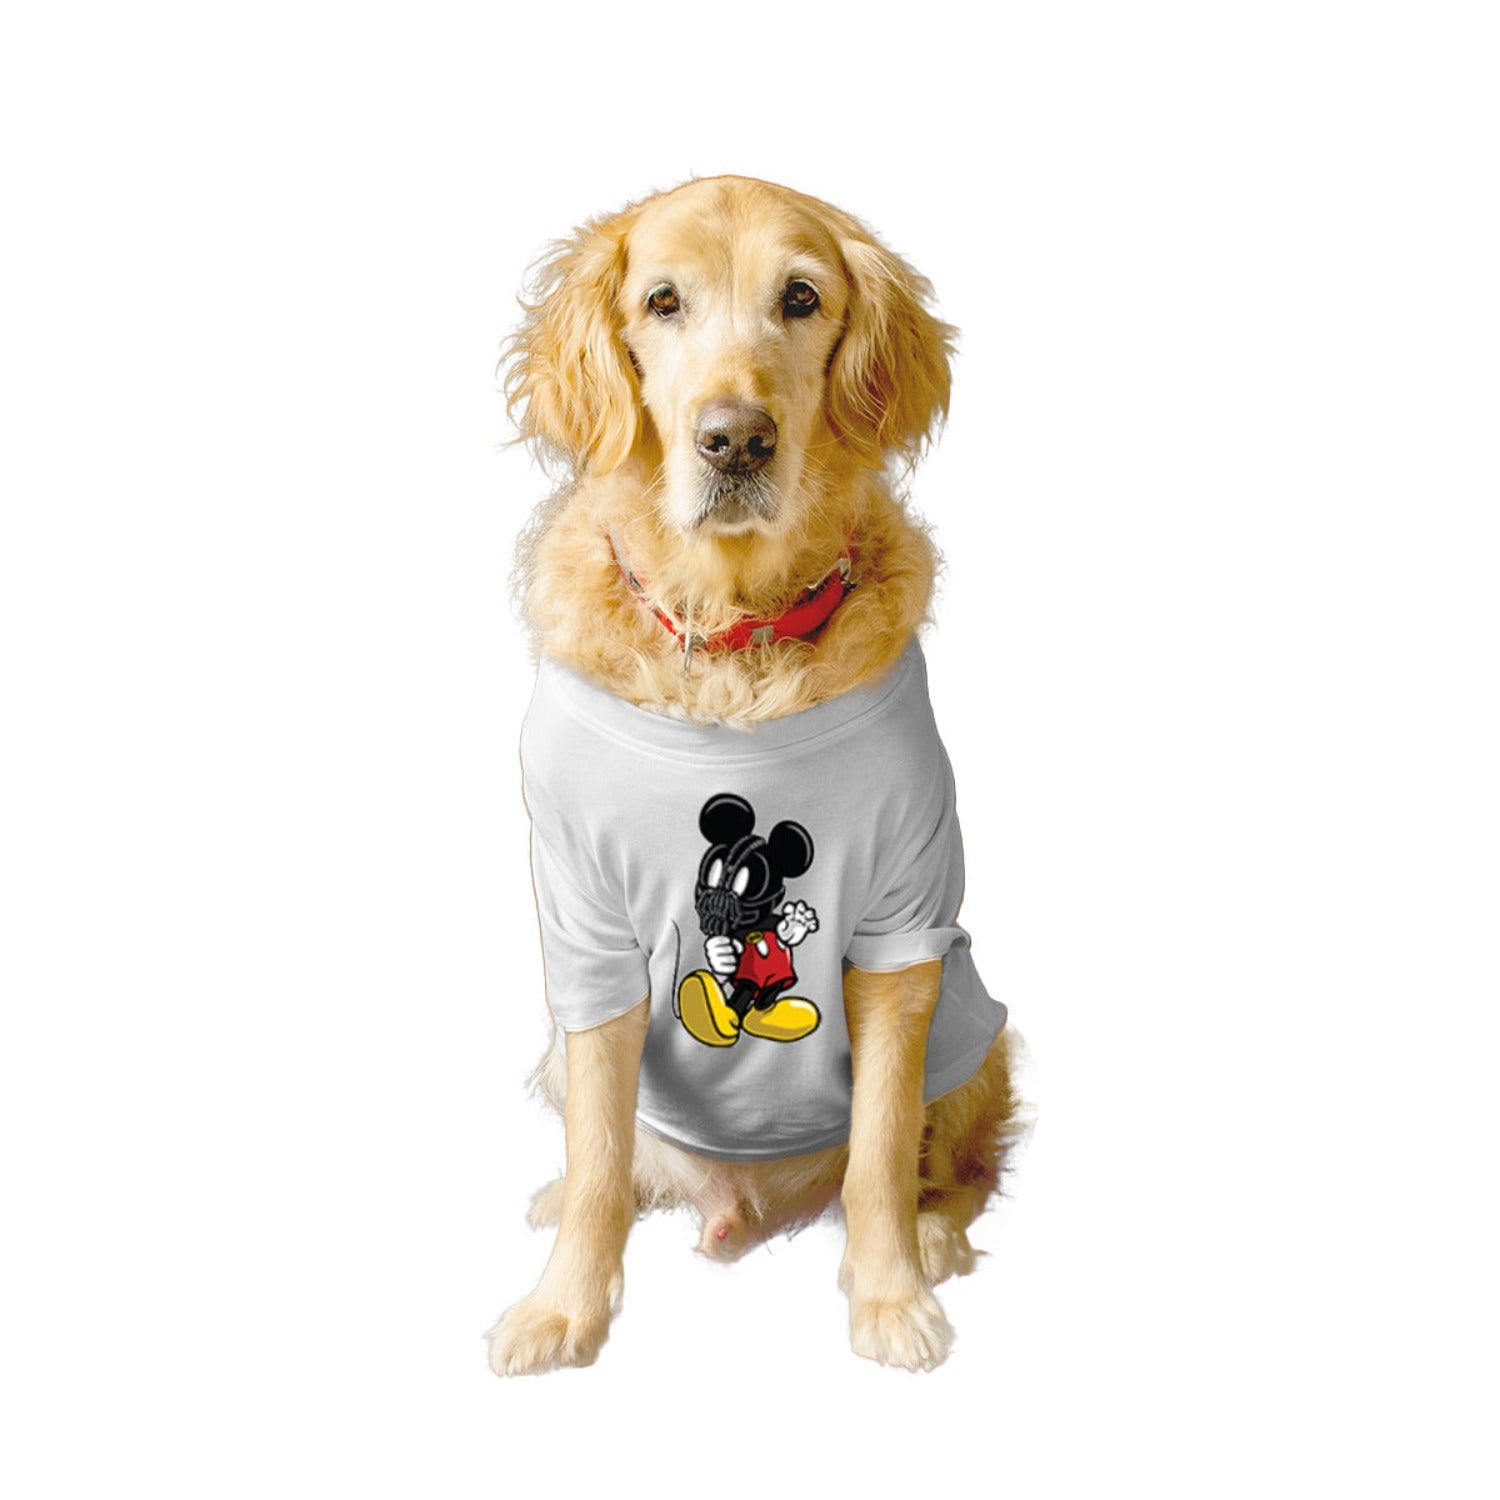 Ruse XX-Small (Chihuahuas, Papillons) / White Ruse Basic Crew Neck "Mouse Bane" Printed Half Sleeves Dog Tee6